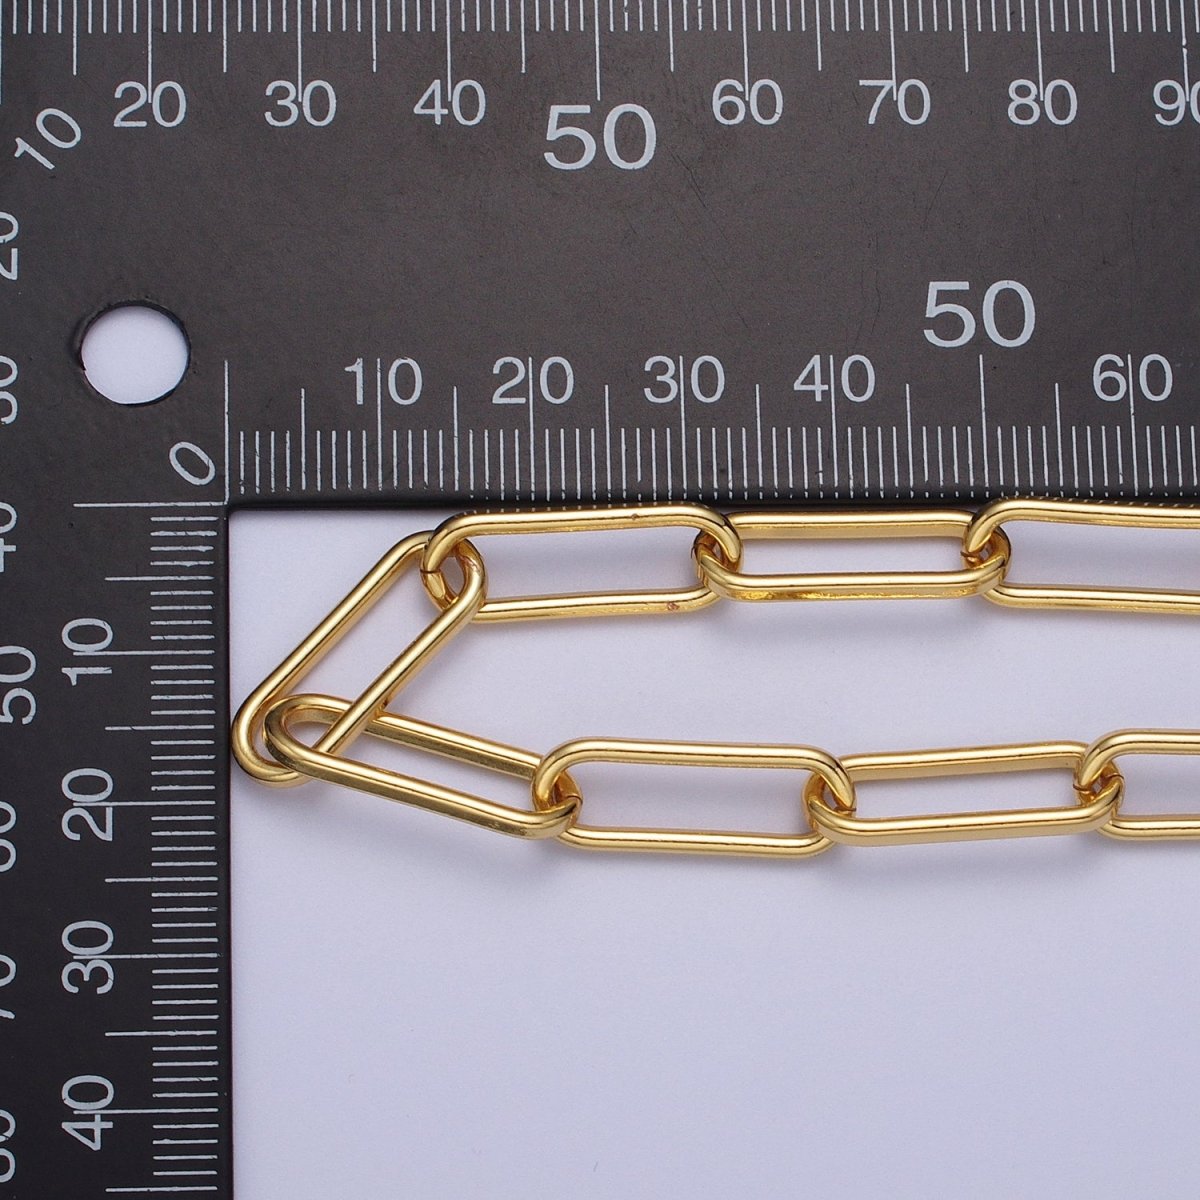 Rounded Paperclip Chain 14K Gold Filled Elongated Chain by Yard, Oval Link Chain Paper Clip Link for DIY Jewelry Making | ROLL-1210 - DLUXCA